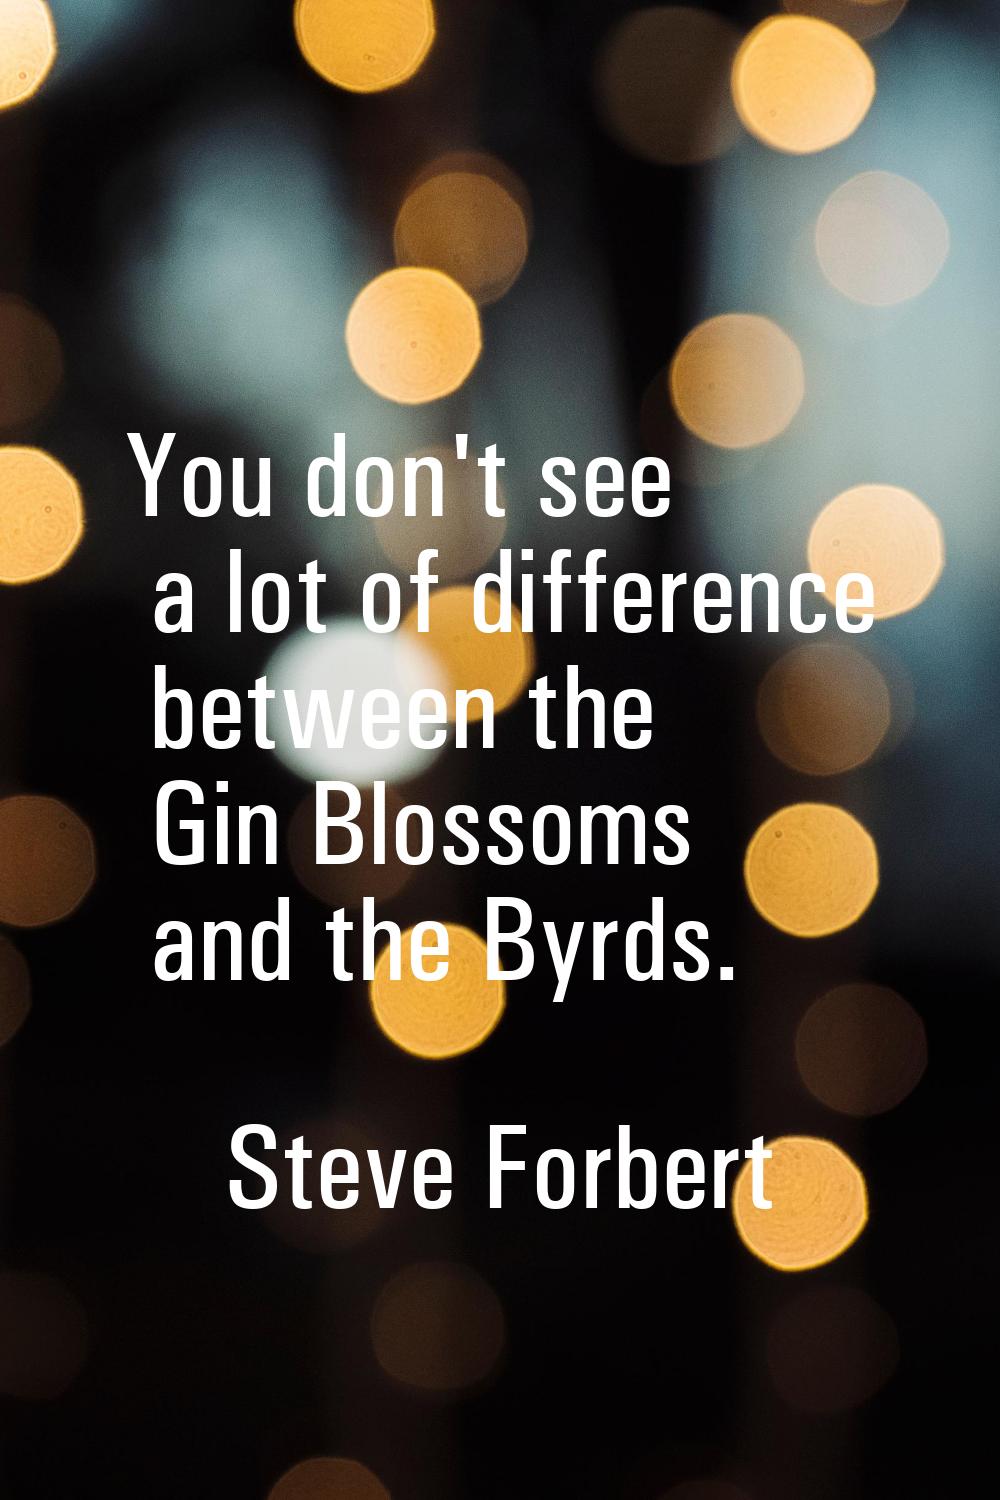 You don't see a lot of difference between the Gin Blossoms and the Byrds.